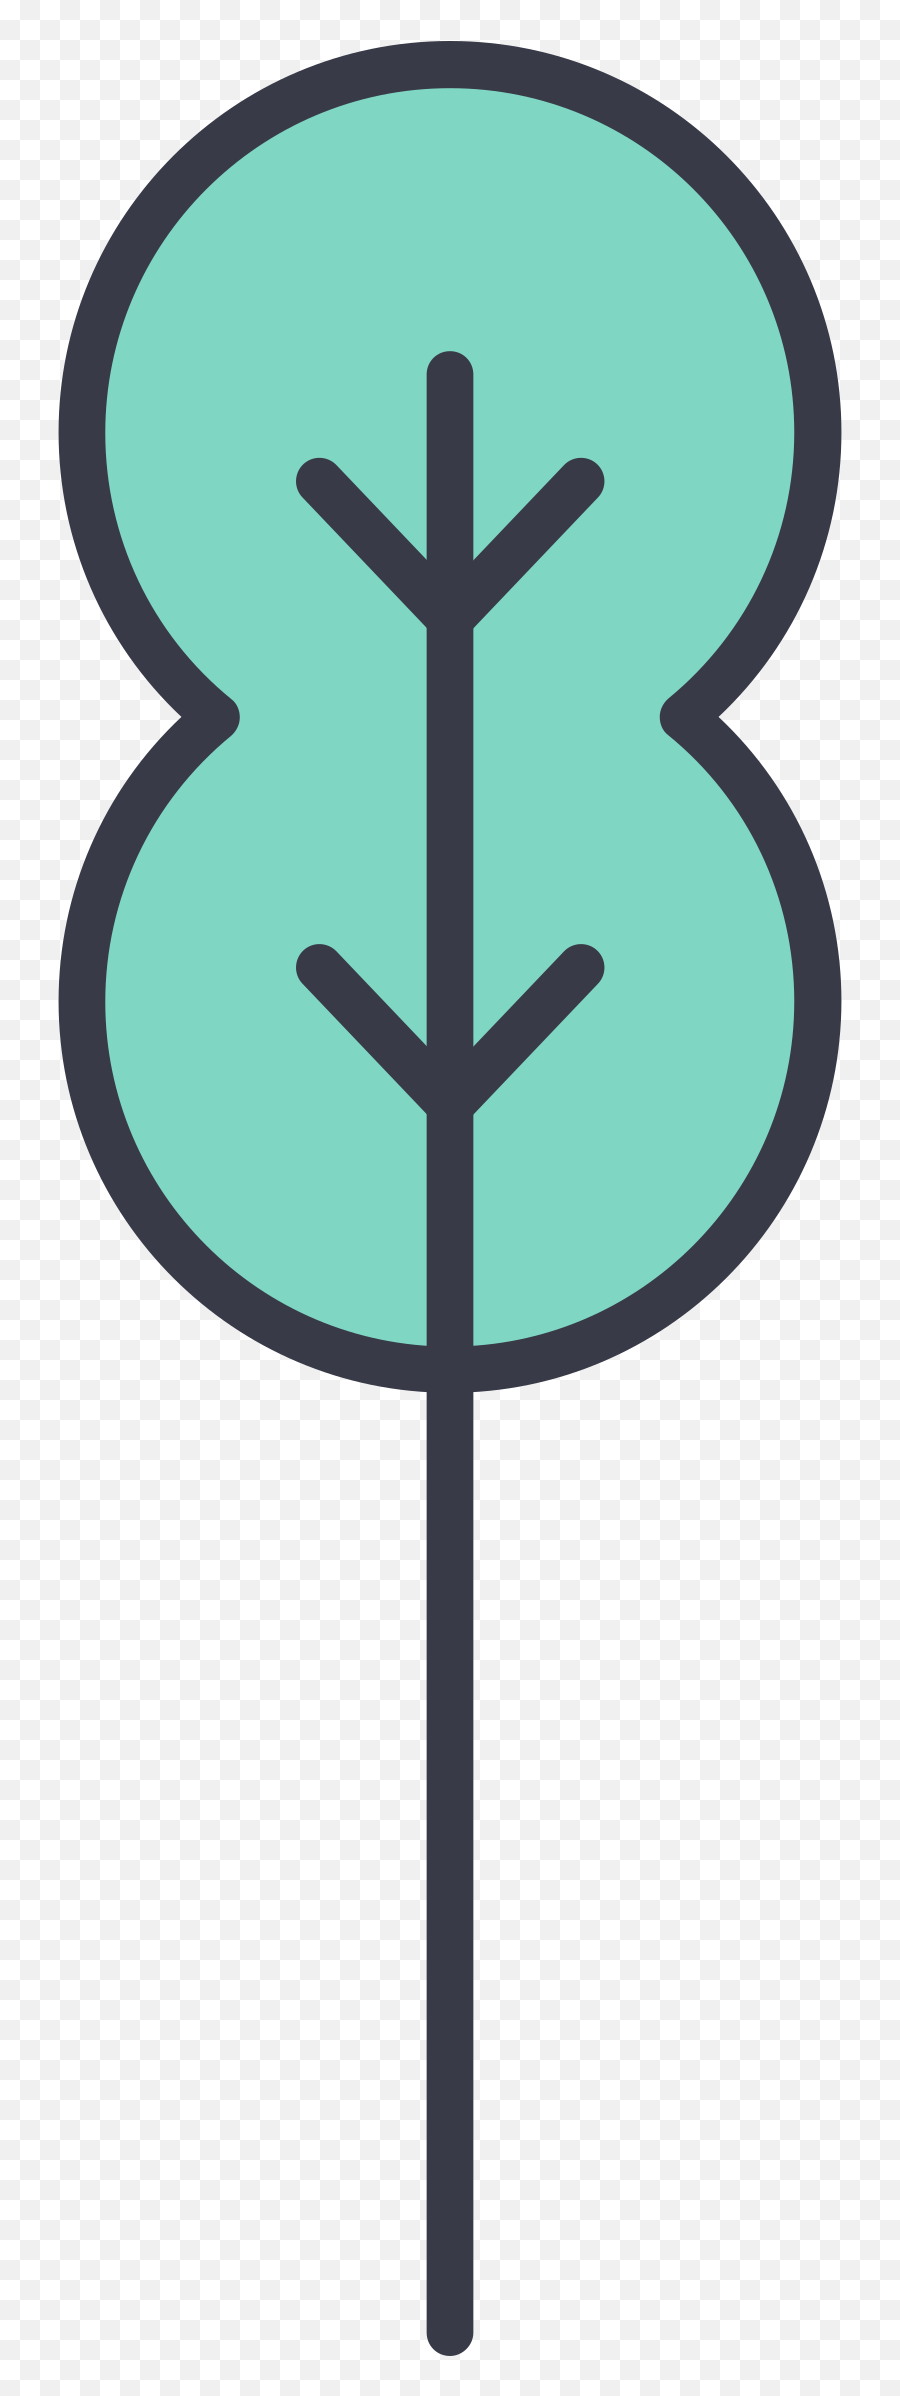 Style Tree Vector Images In Png And Svg Icons8 Illustrations - Vertical,Green Tree Icon